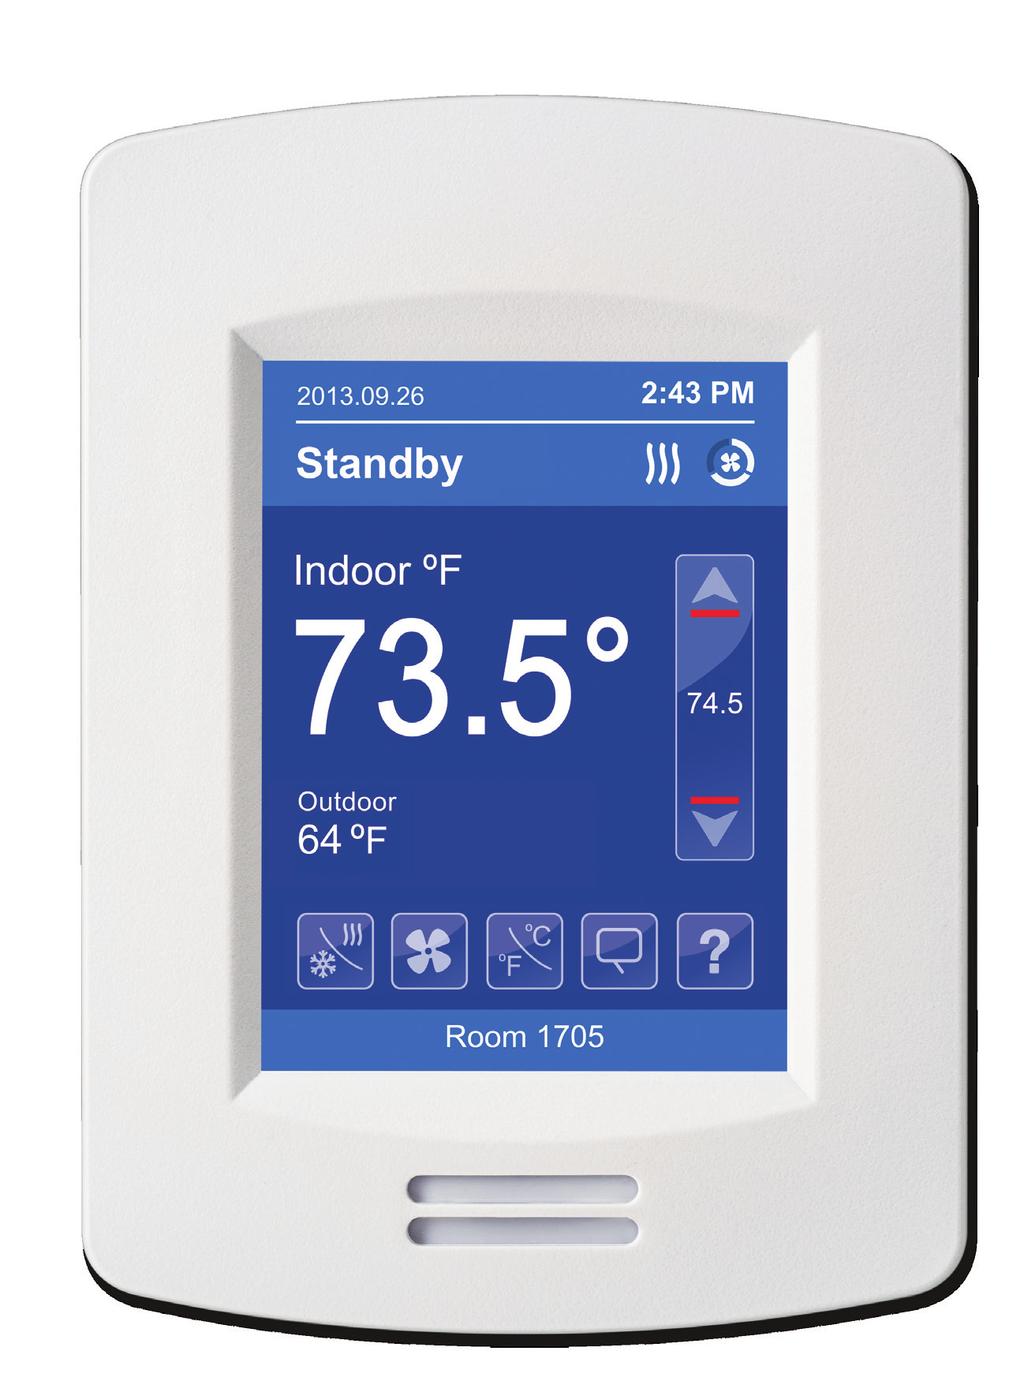 Installation Guide 11 HOME SREEN SPLAY Typical Hospitality User Interface Shown Date Occupancy Status Indoor Temperature Time System Status Fan Status Up Arrow Increase Temperature Setpoint Actual